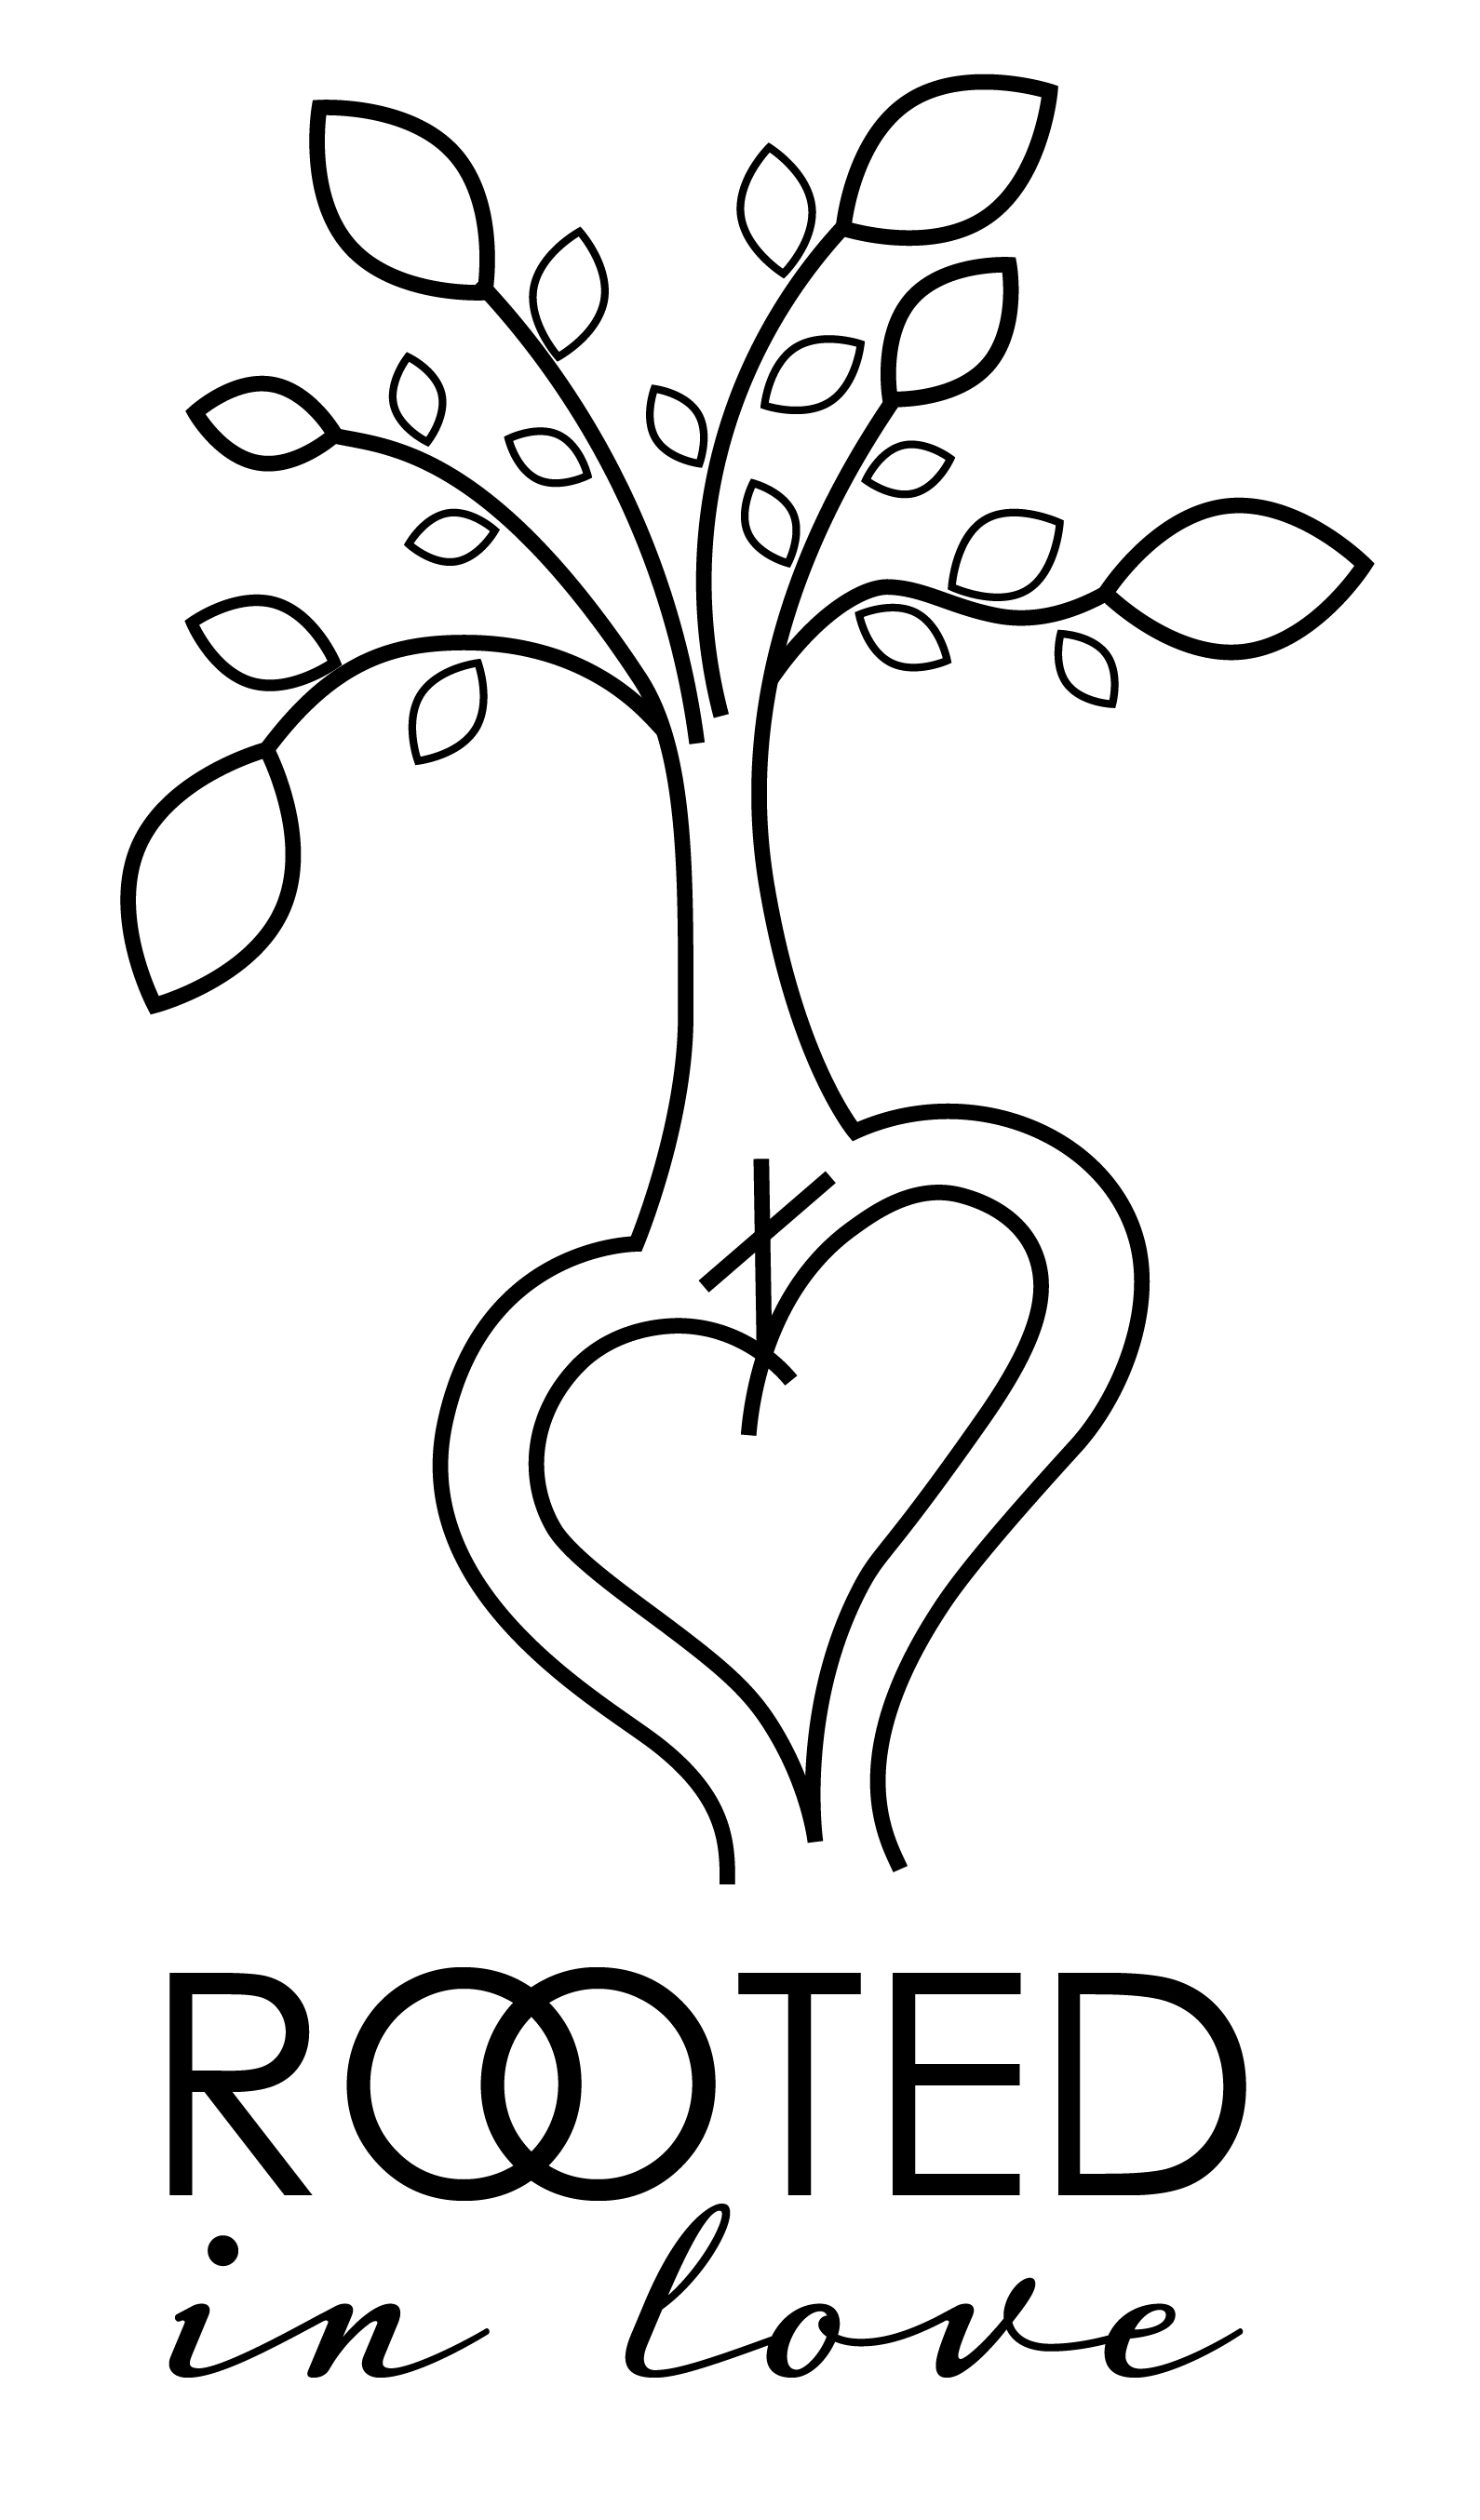 rooted logo 1 2